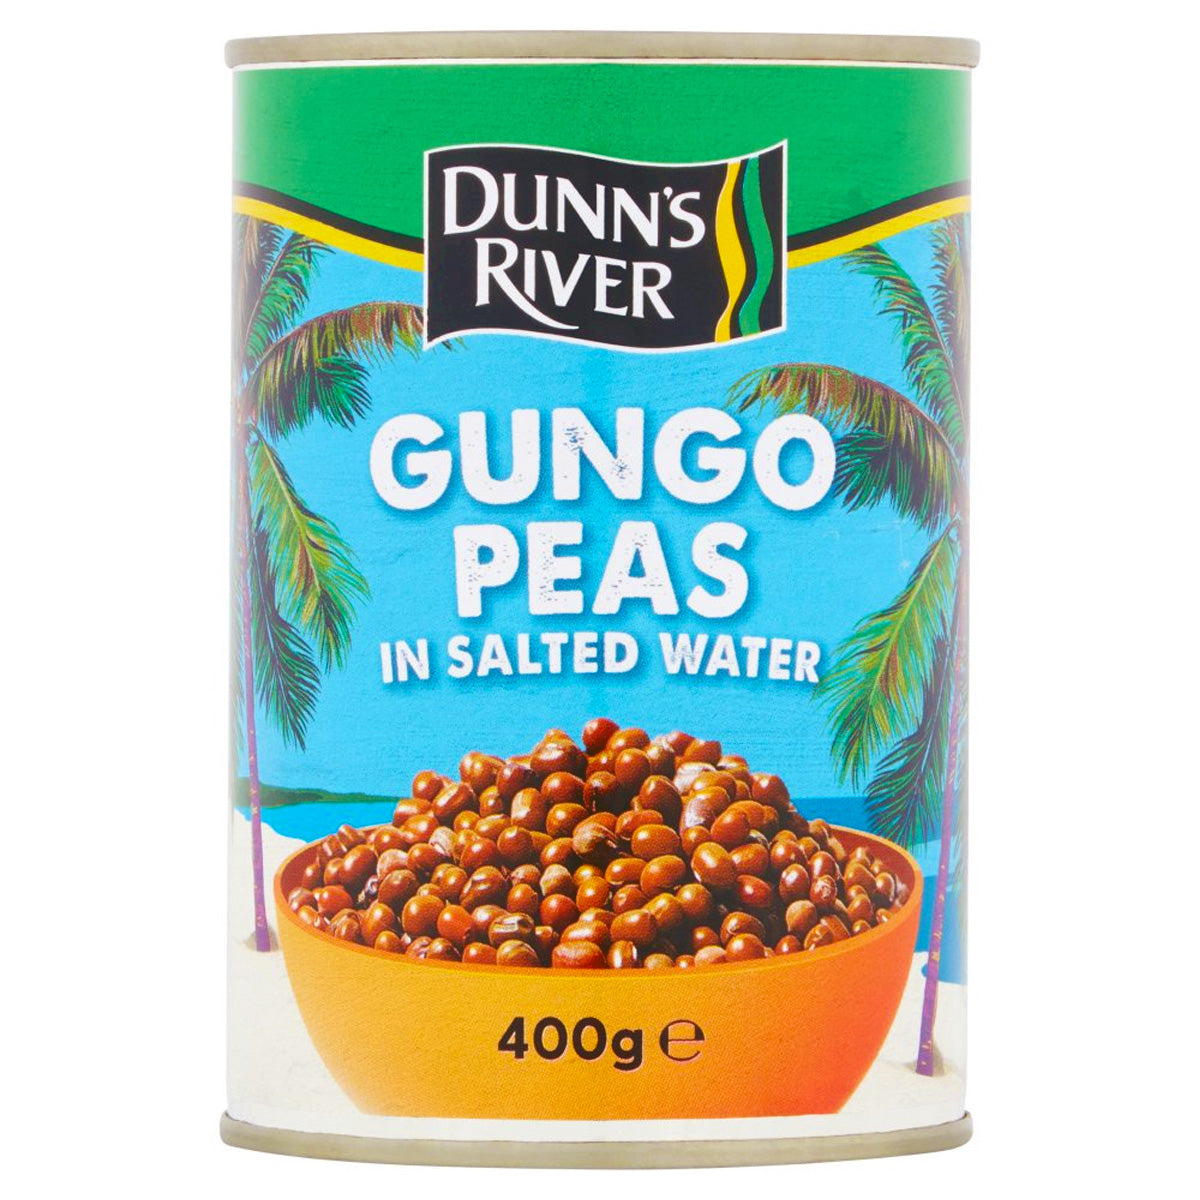 Dunn's River - Gungo Peas in Salted Water - 400g - Continental Food Store